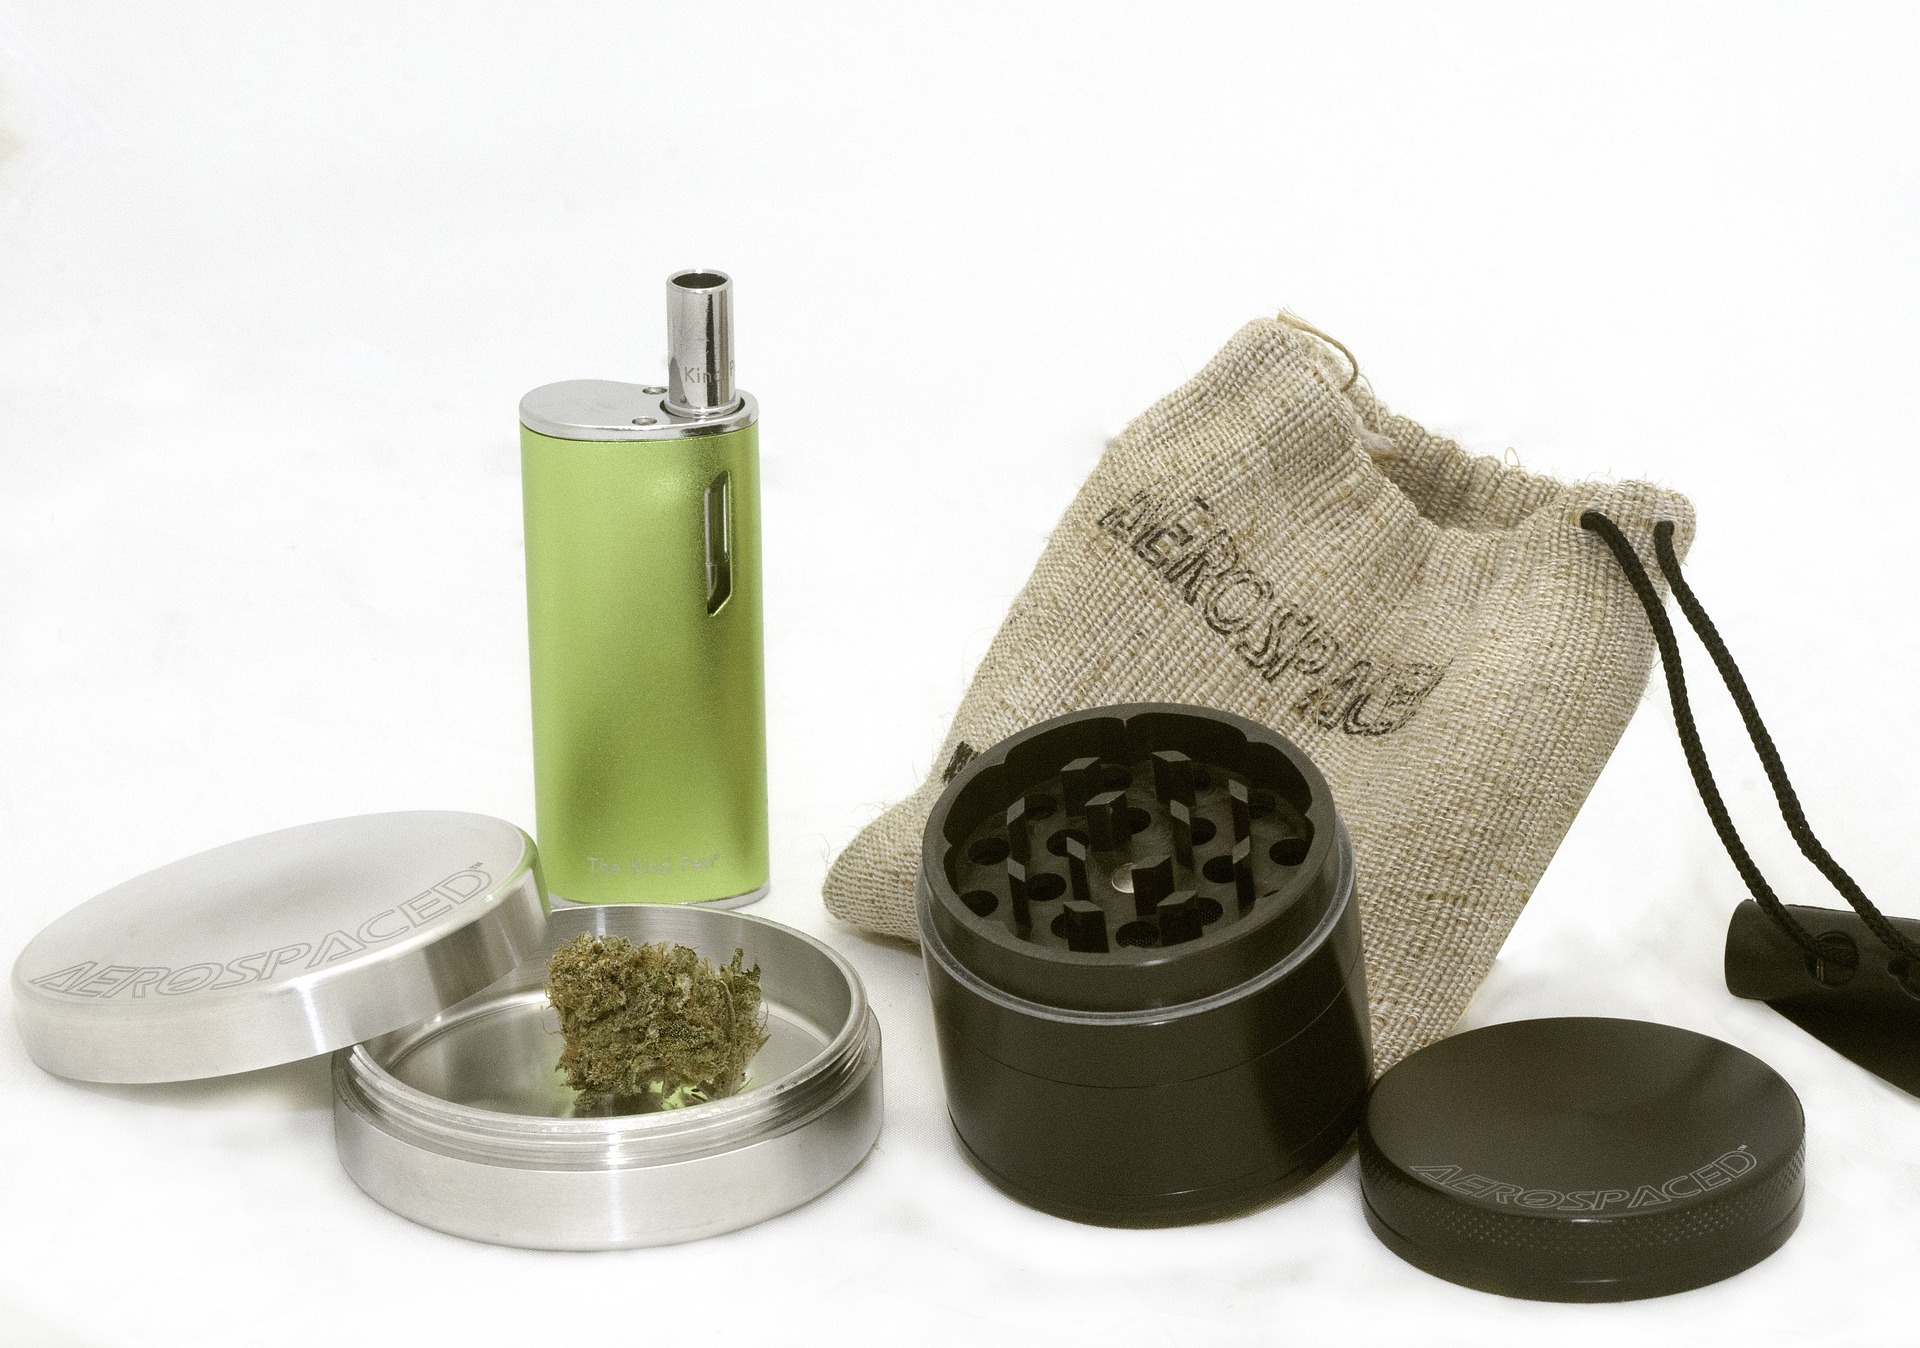 Several ways to use Cannabis, including a vape pen, grinder, and flower